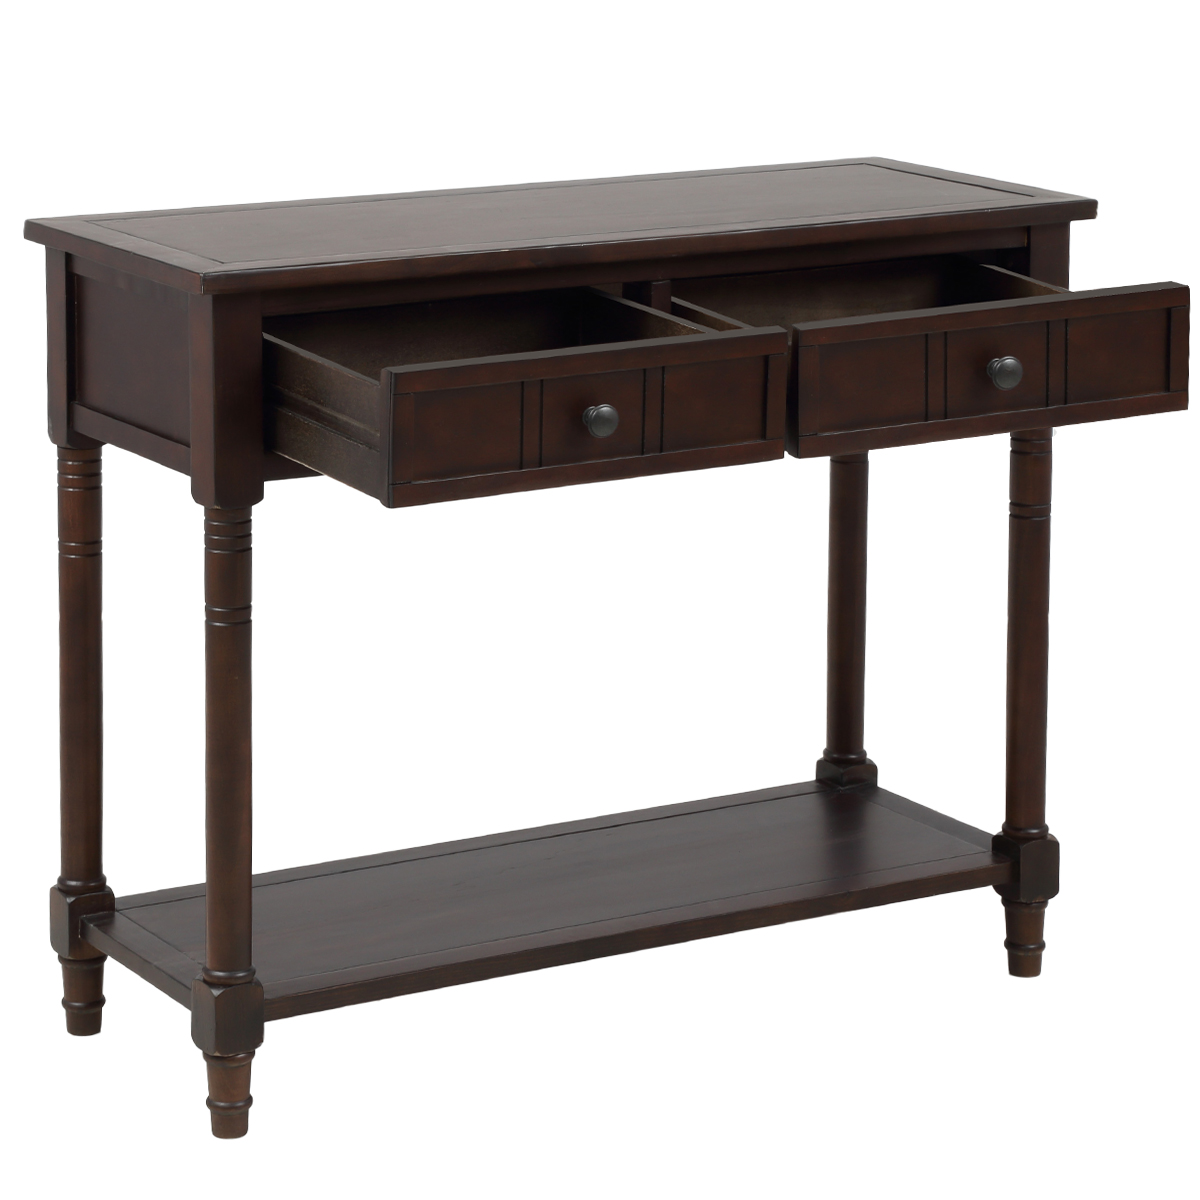 Traditional Design Daisy Series Console Table - WF191267AAB